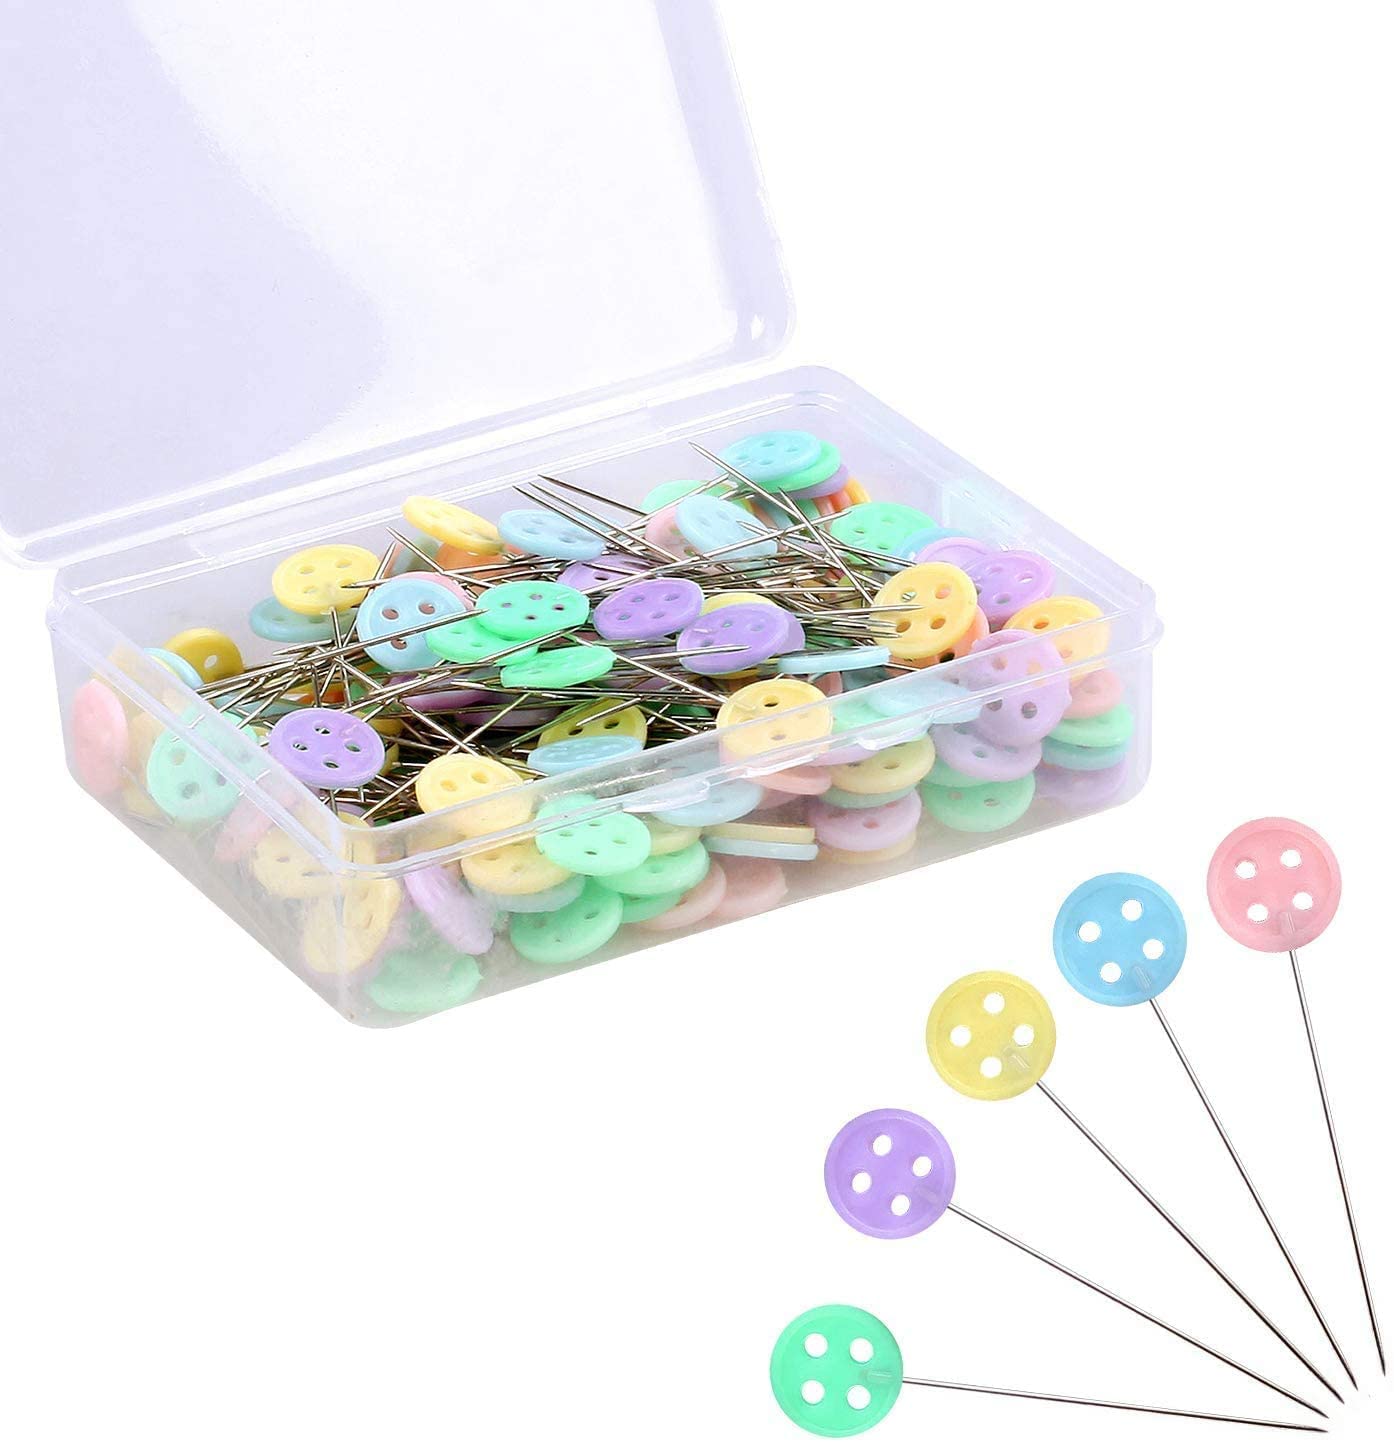 Yosawa 200 Pcs Sewing Pins Straight Pins Quilting Pins Decorative Pins with  Colored Heads for DIY Craft Dressmaker Assorted （Bear）